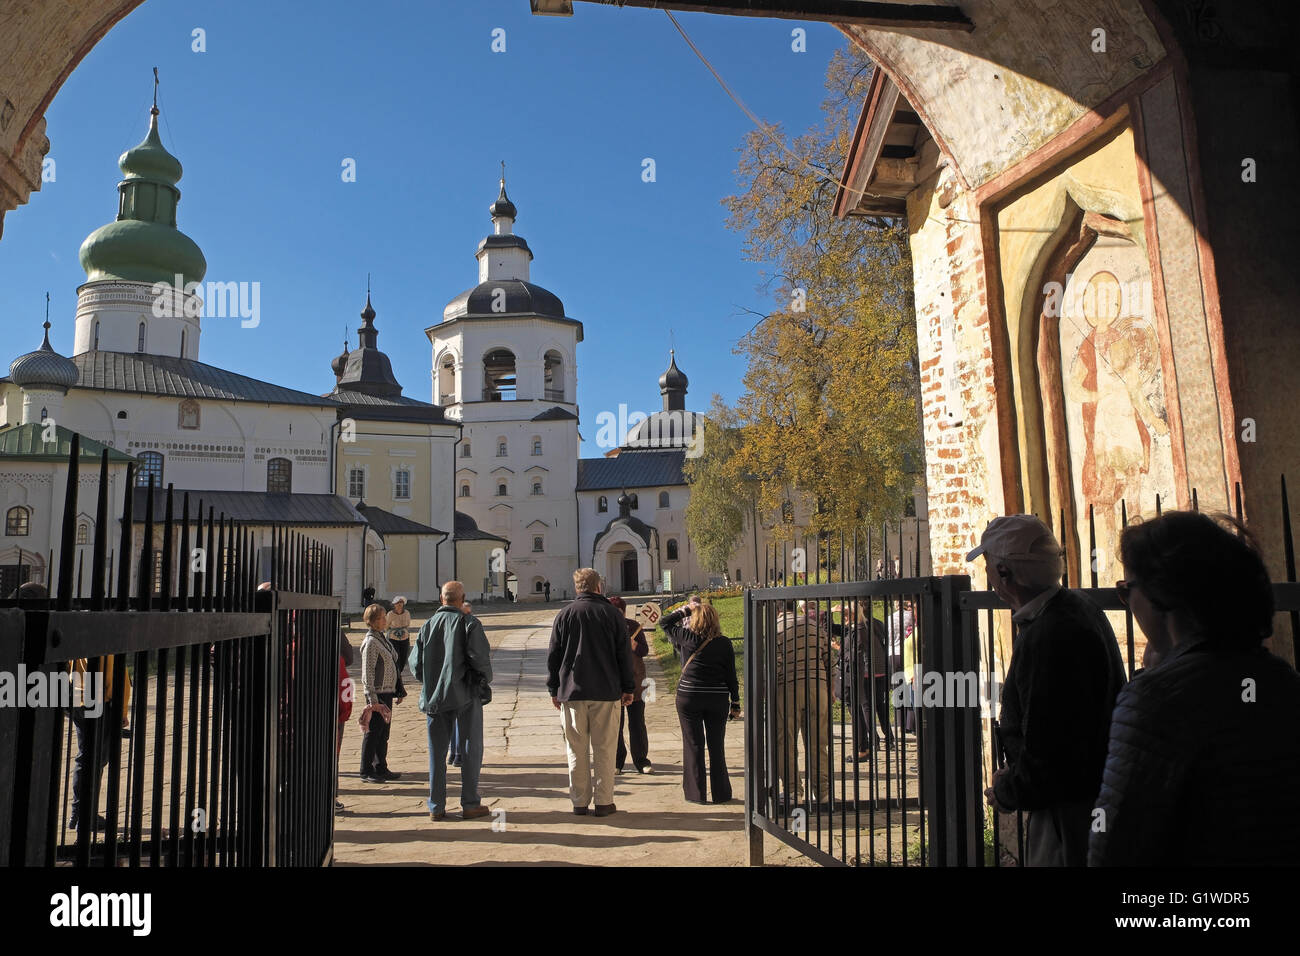 Monastery buildings seen from the Holy Gate, entrance to Kirillov-Belozersky Monastery, north of Vologda, Russia. Stock Photo